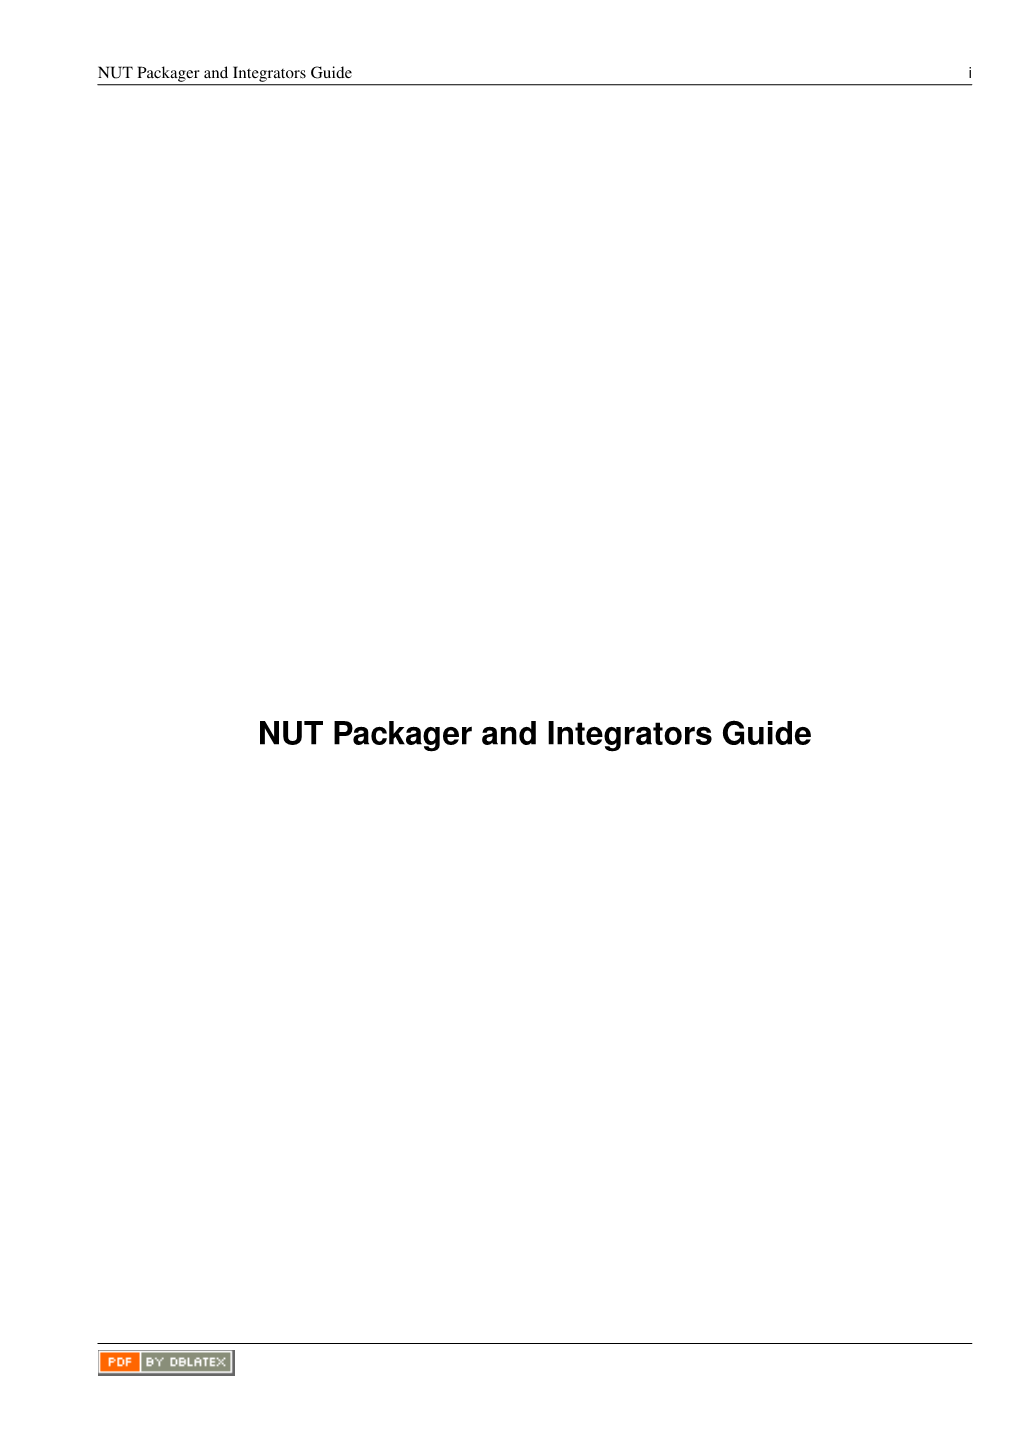 Packager Guide